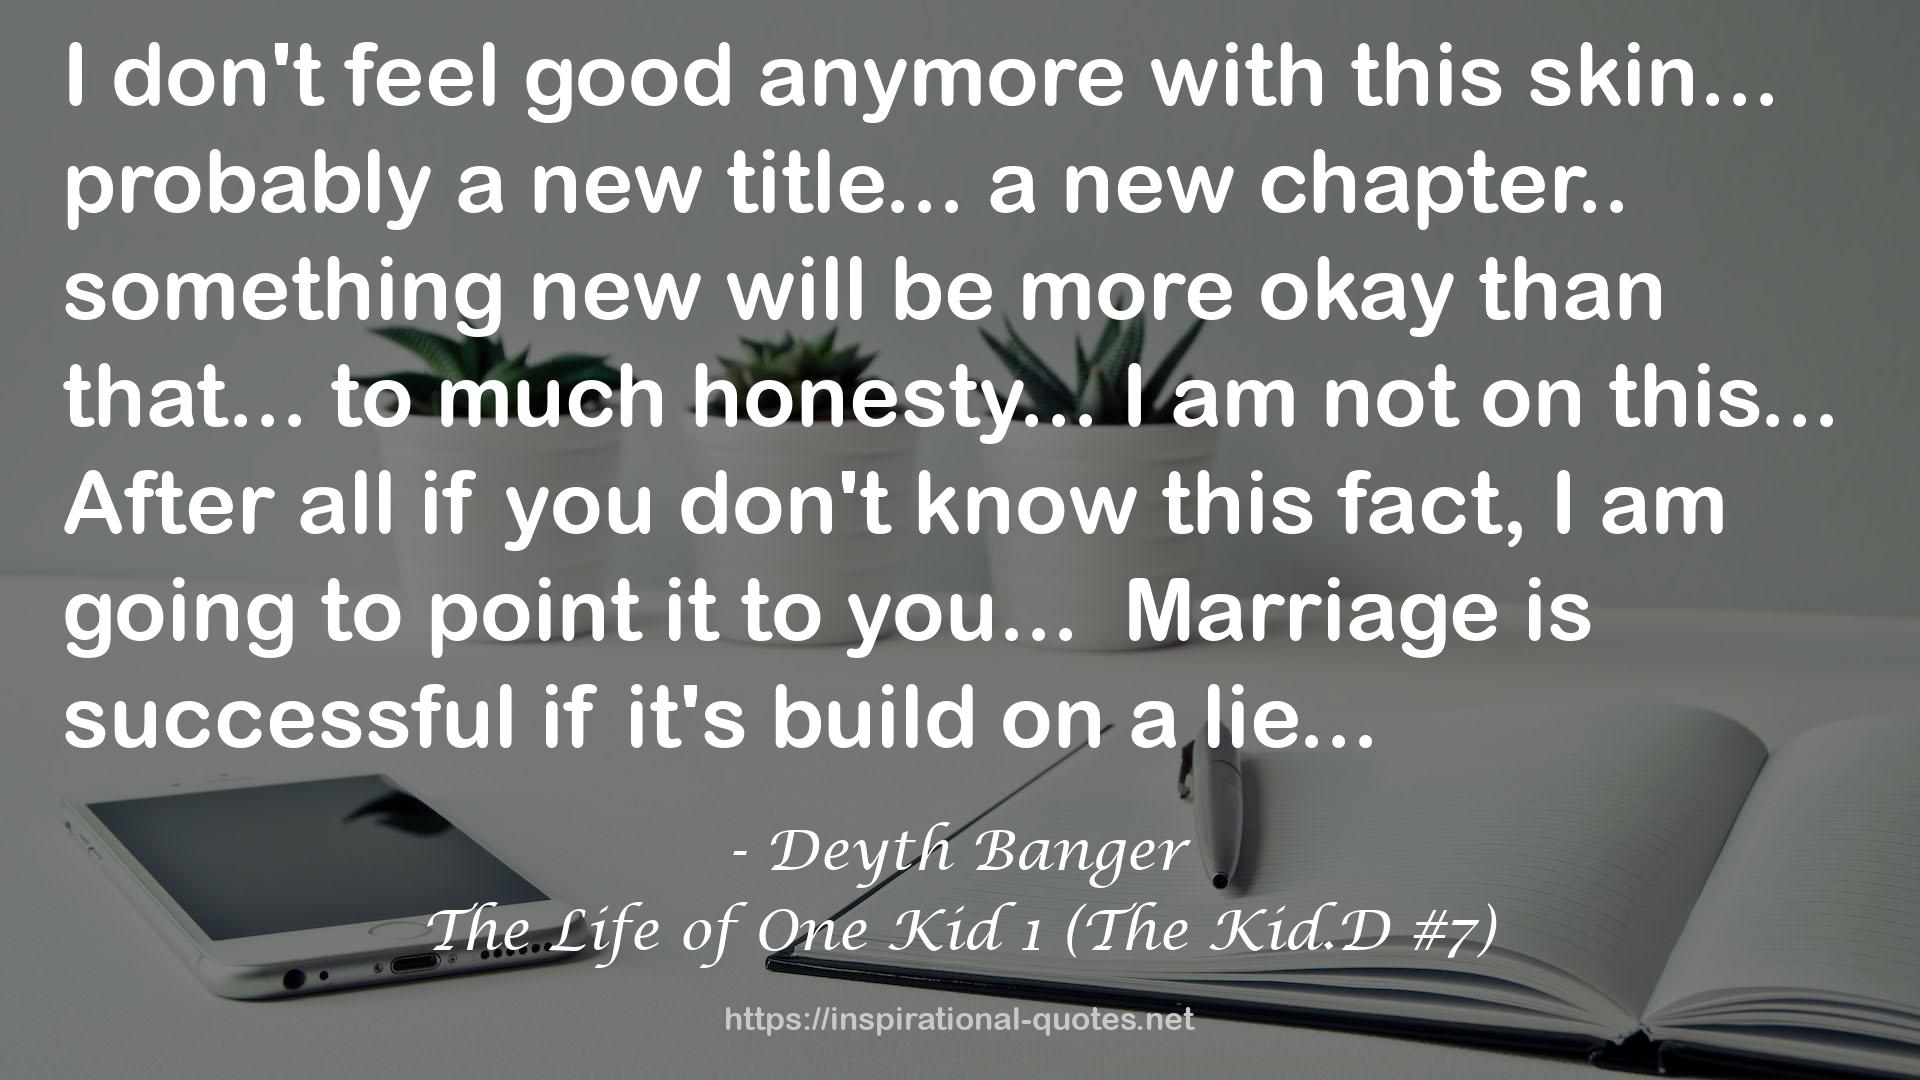 The Life of One Kid 1 (The Kid.D #7) QUOTES